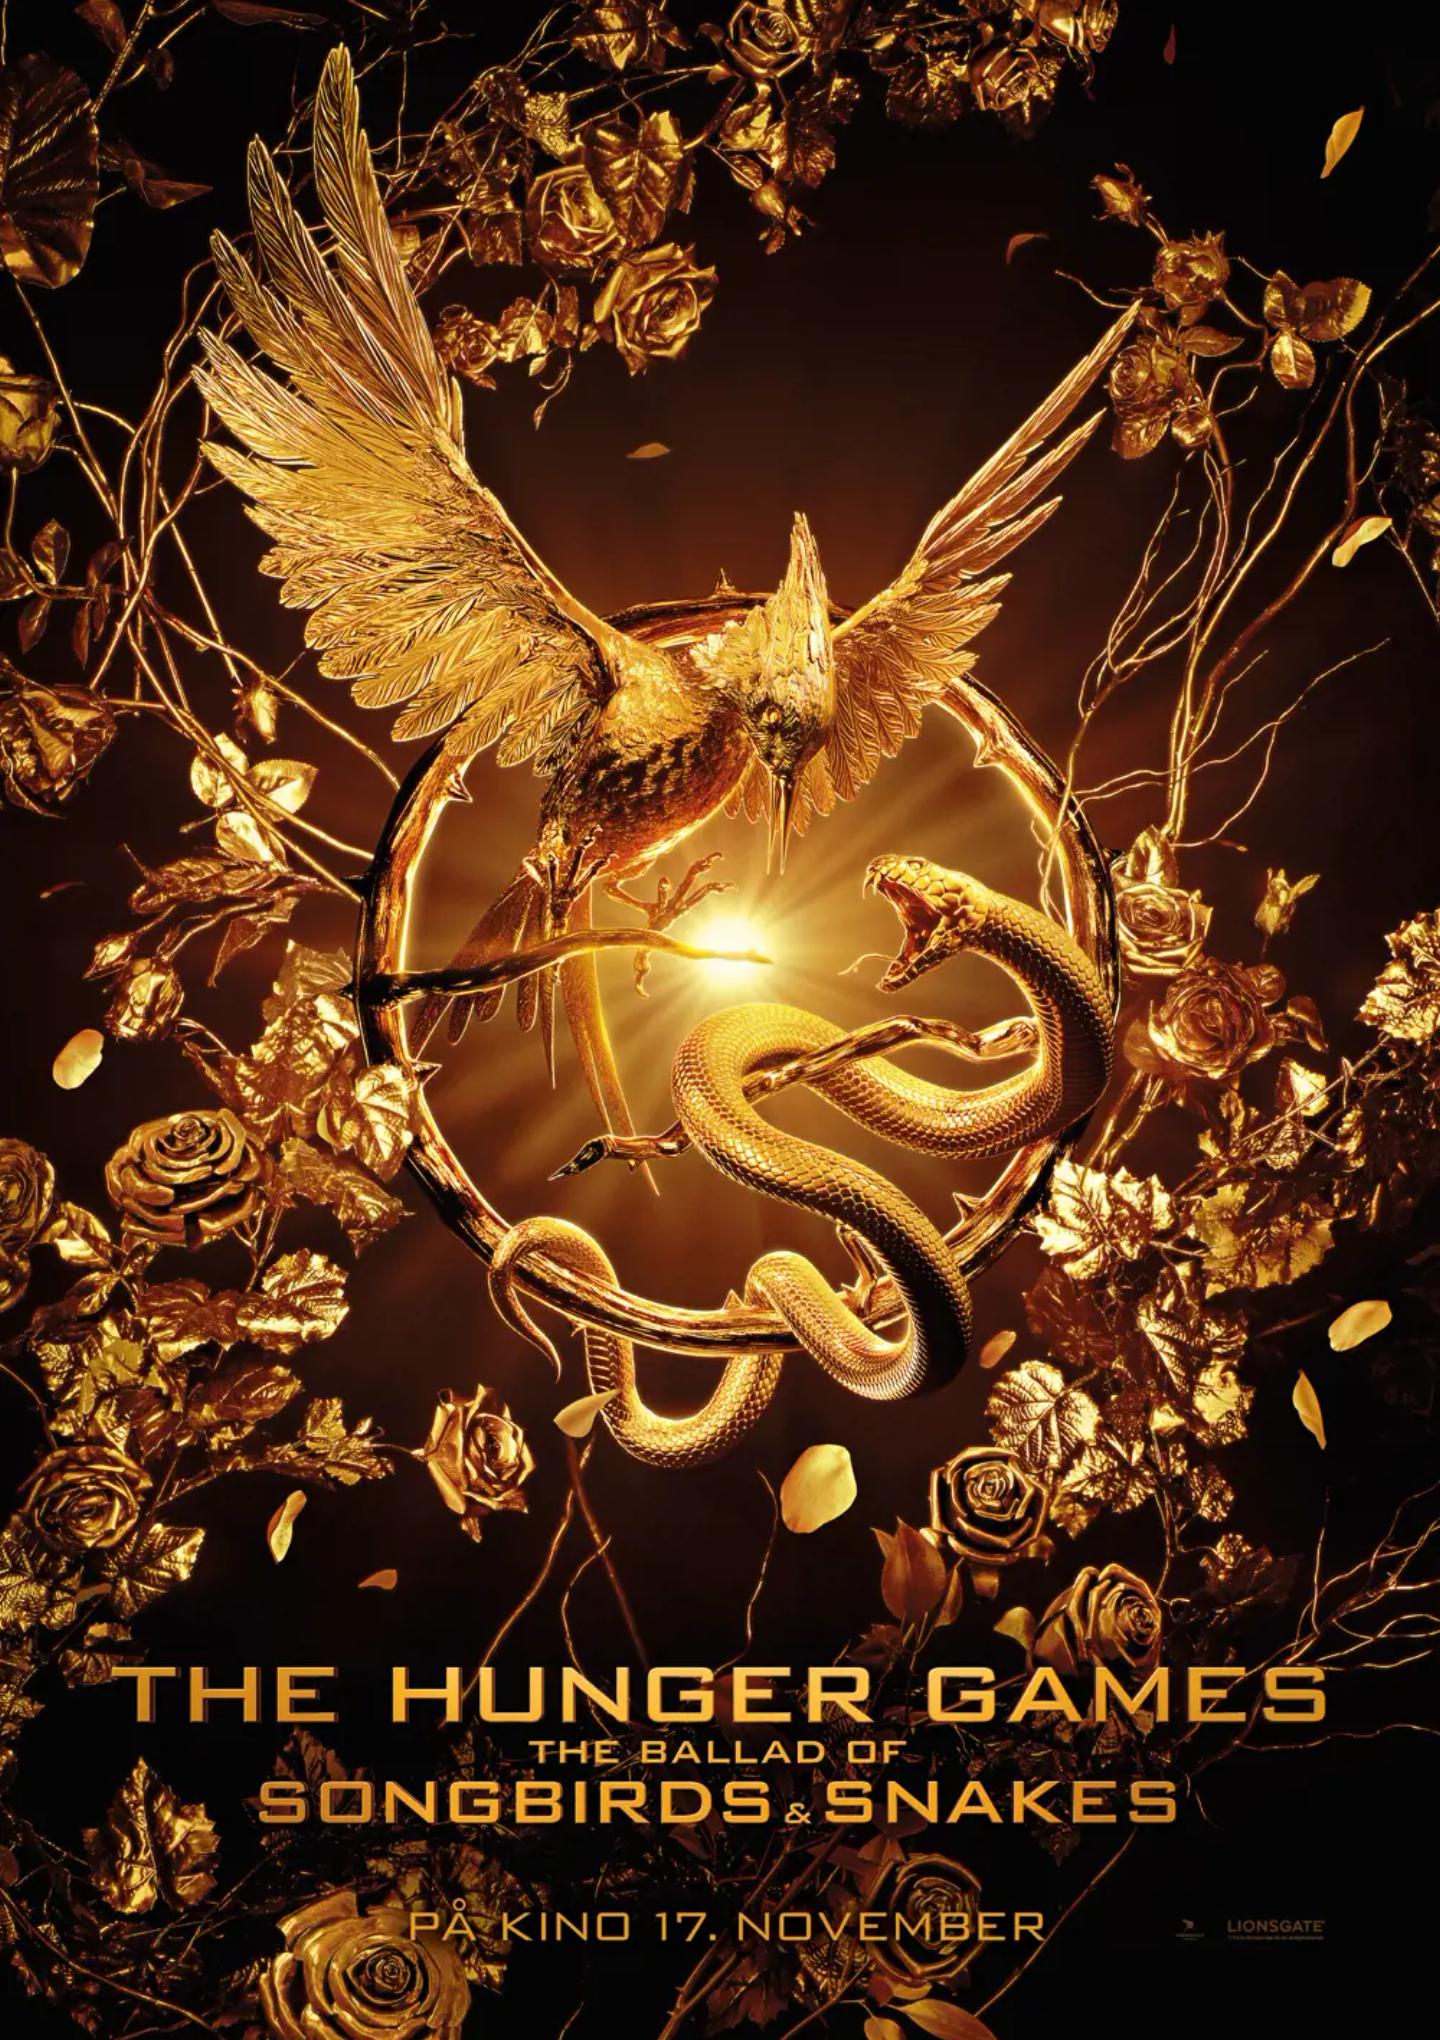 Plakat for 'The Hunger Games: The Ballad of Songbirds and Snakes'